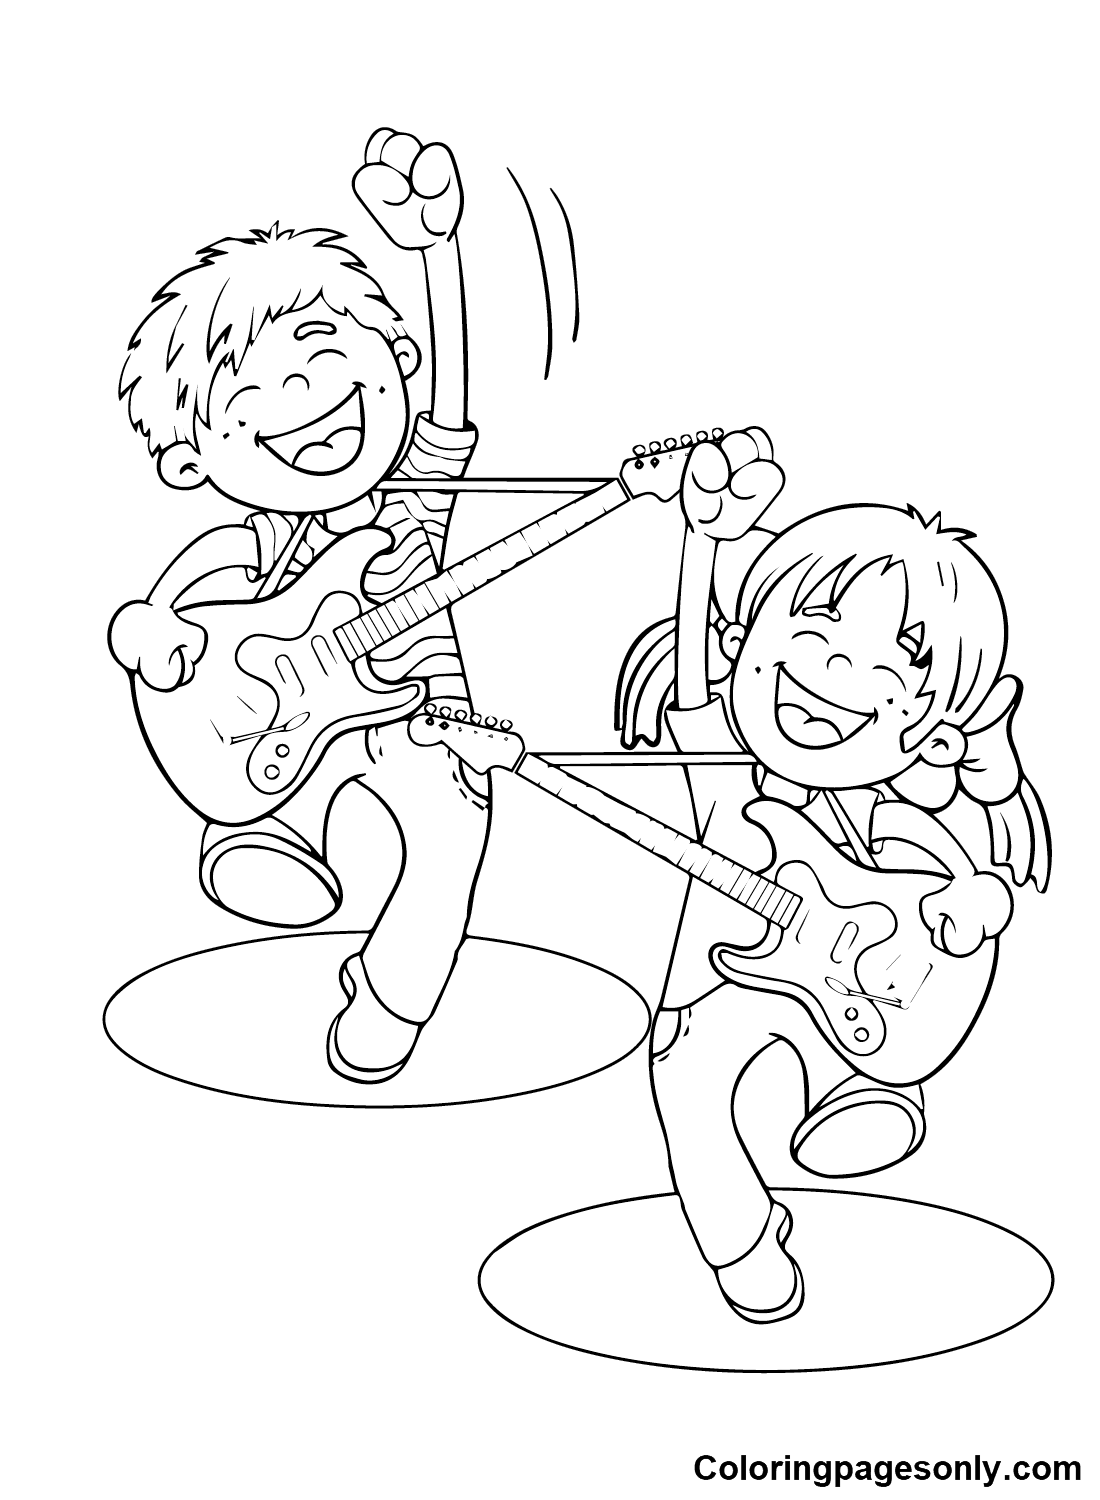 Happy Children with Guitar Coloring Page